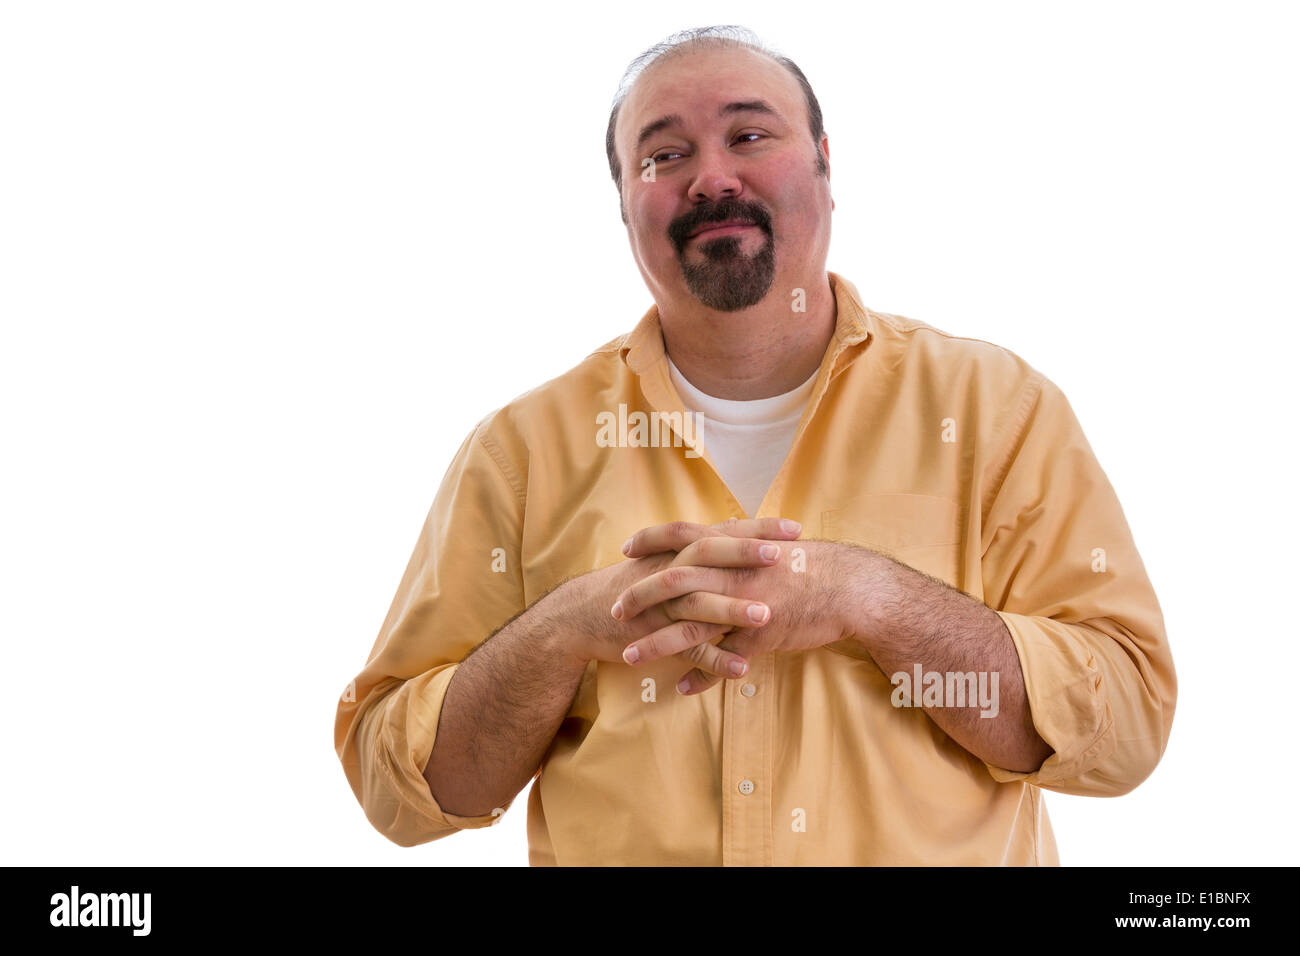 Happy overweight middle-aged man with a goatee clasping his hands over his chest and glancing sideways with a complacent express Stock Photo